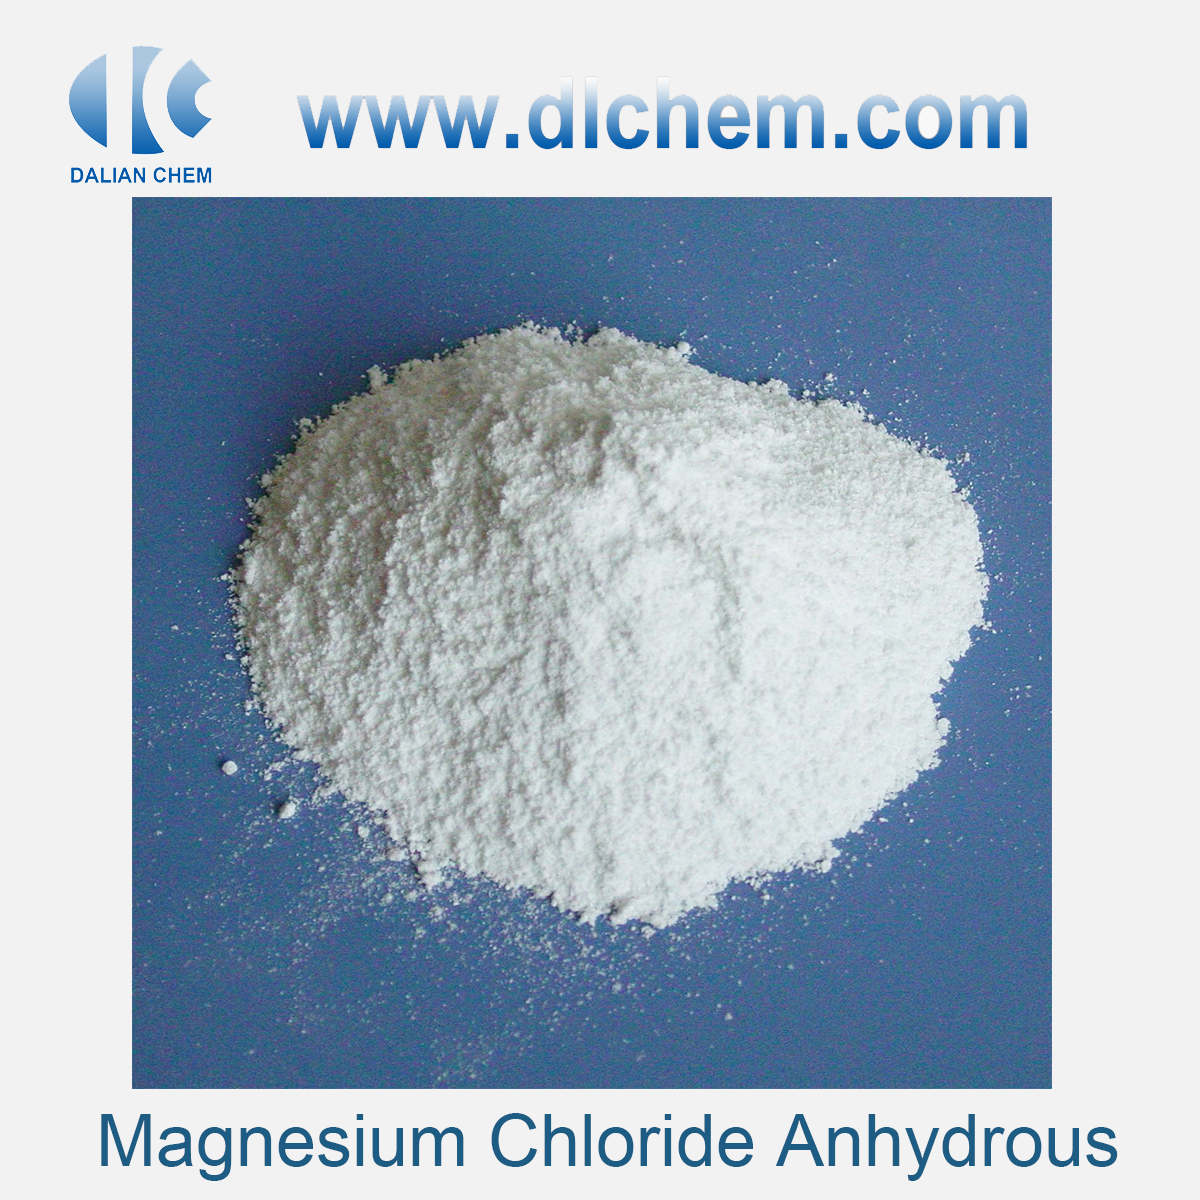 Magnesium Chloride Anhydrous CAS No.7786-30-3